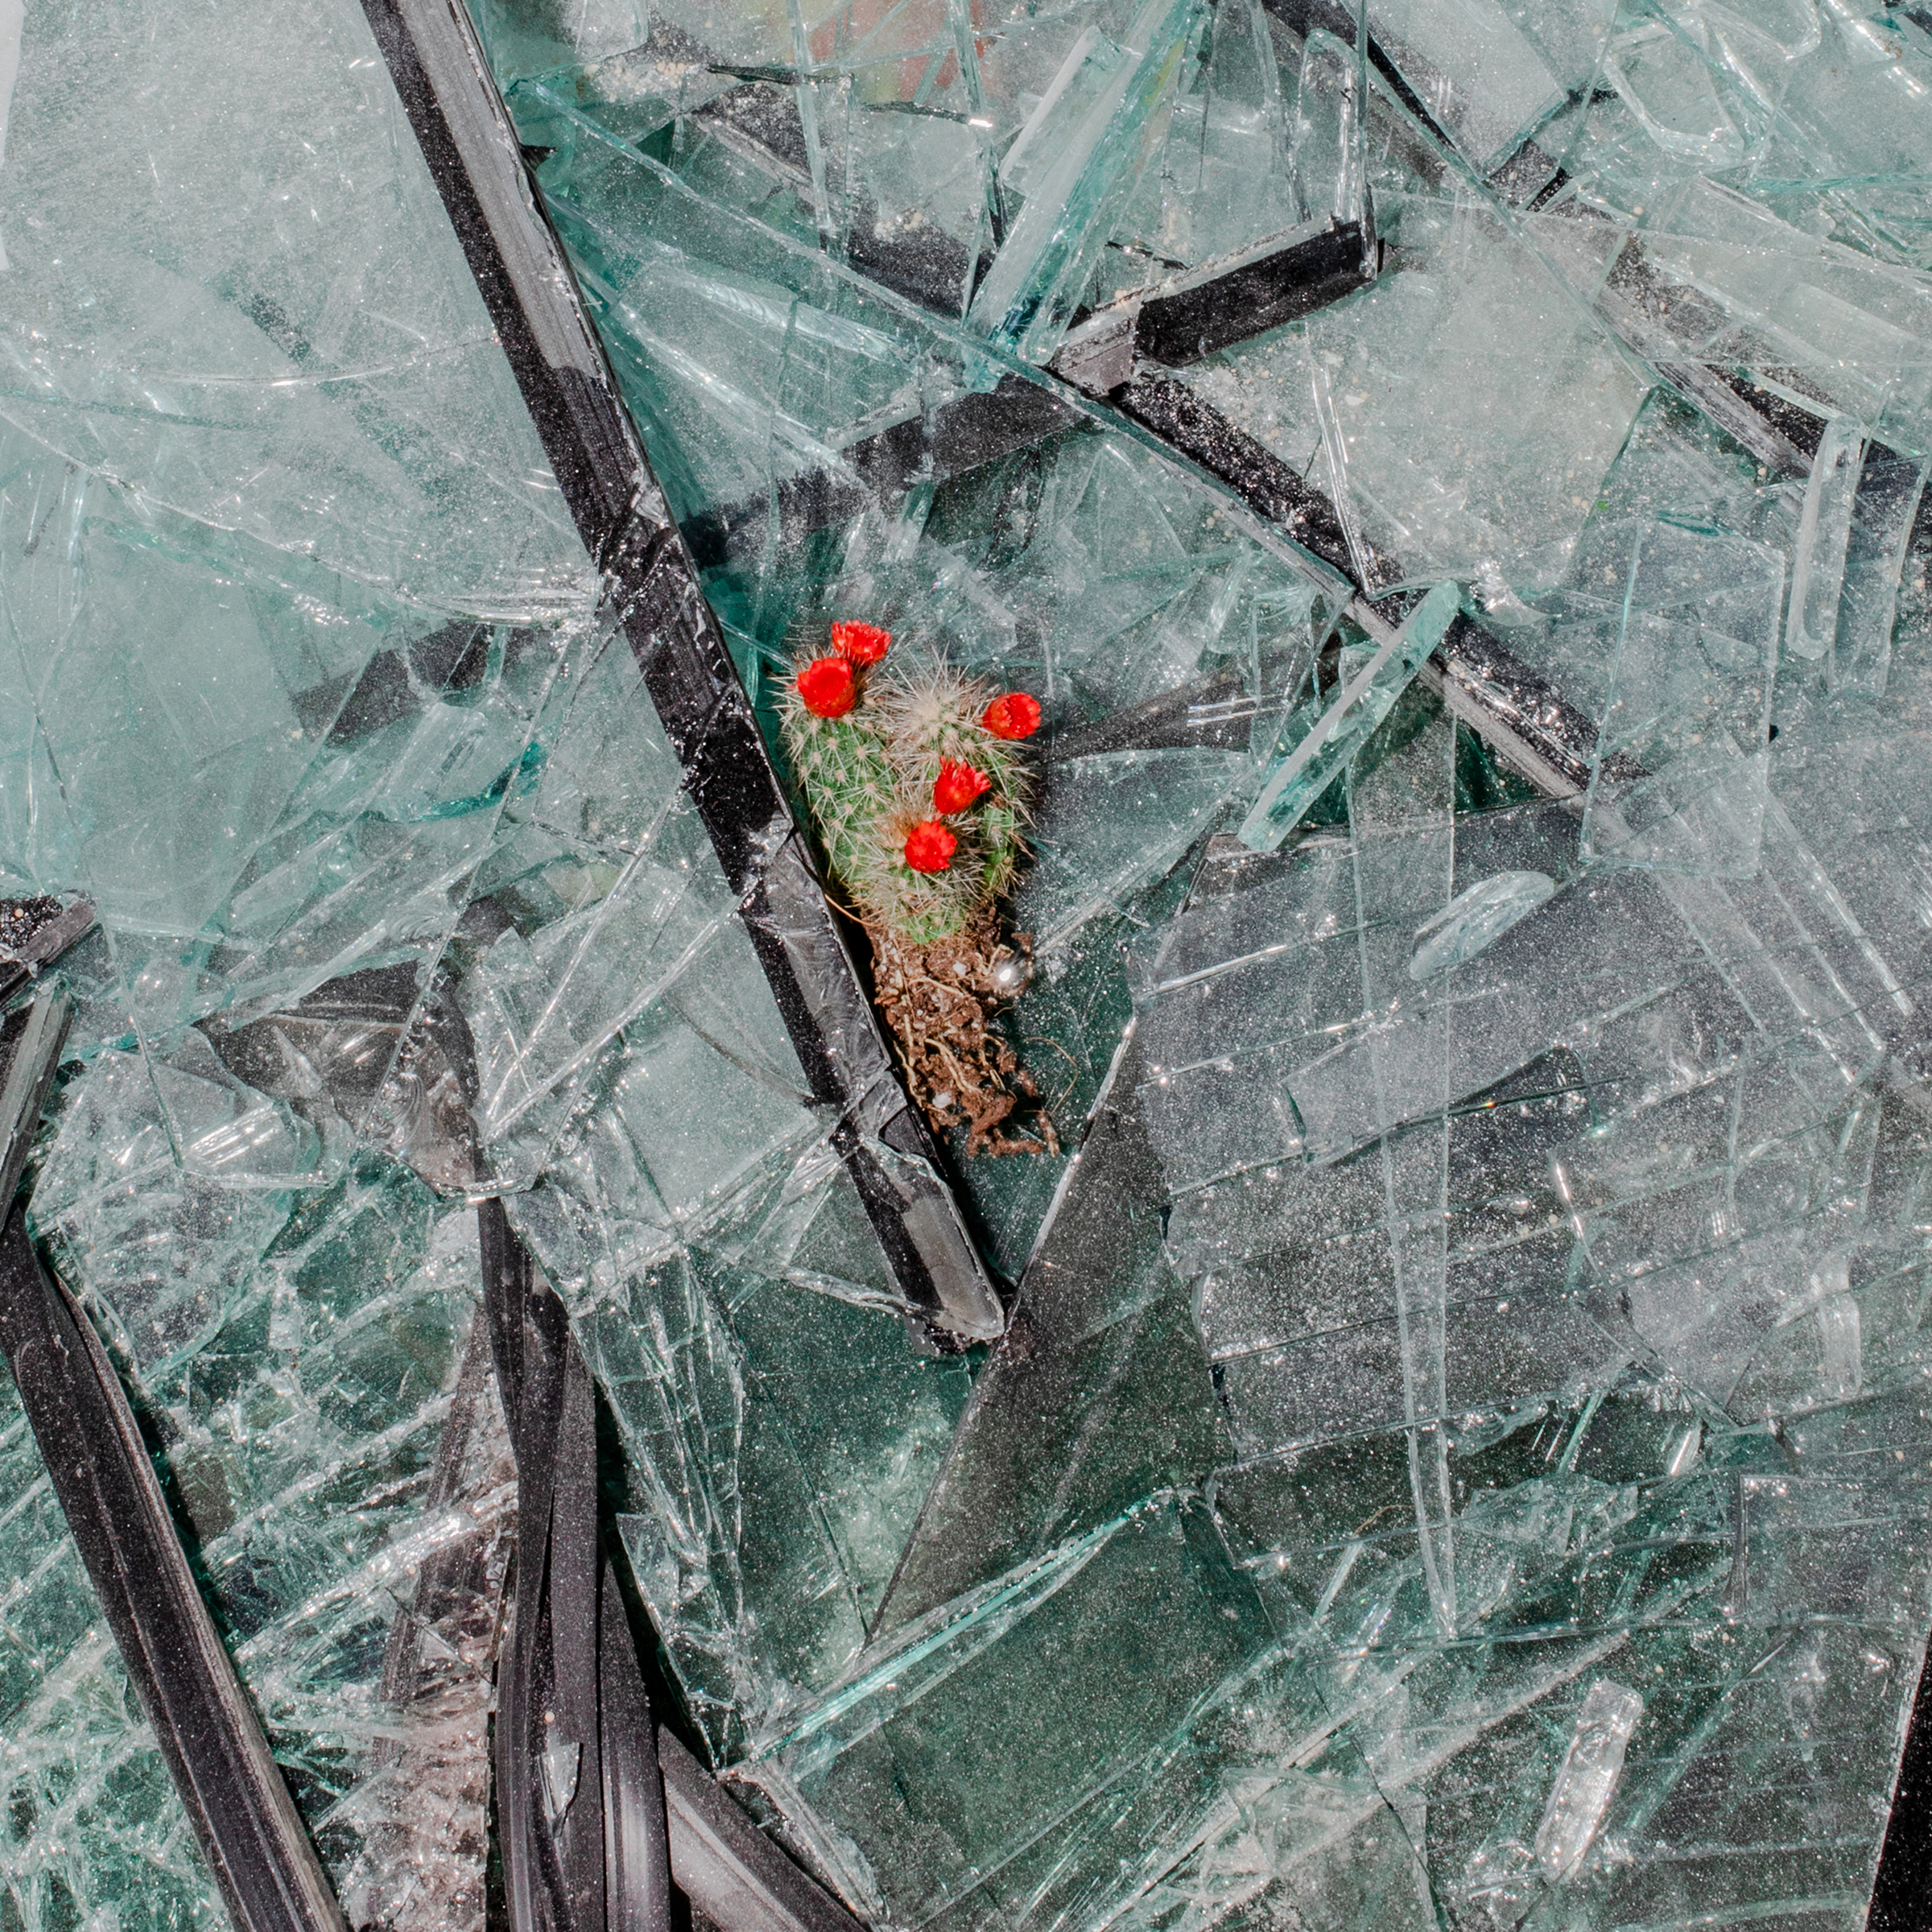 A small cactus rests on a pile of glass the day after the blast. Cleanup efforts across Beirut have been led by volunteers, with little visible assistance from official agencies.